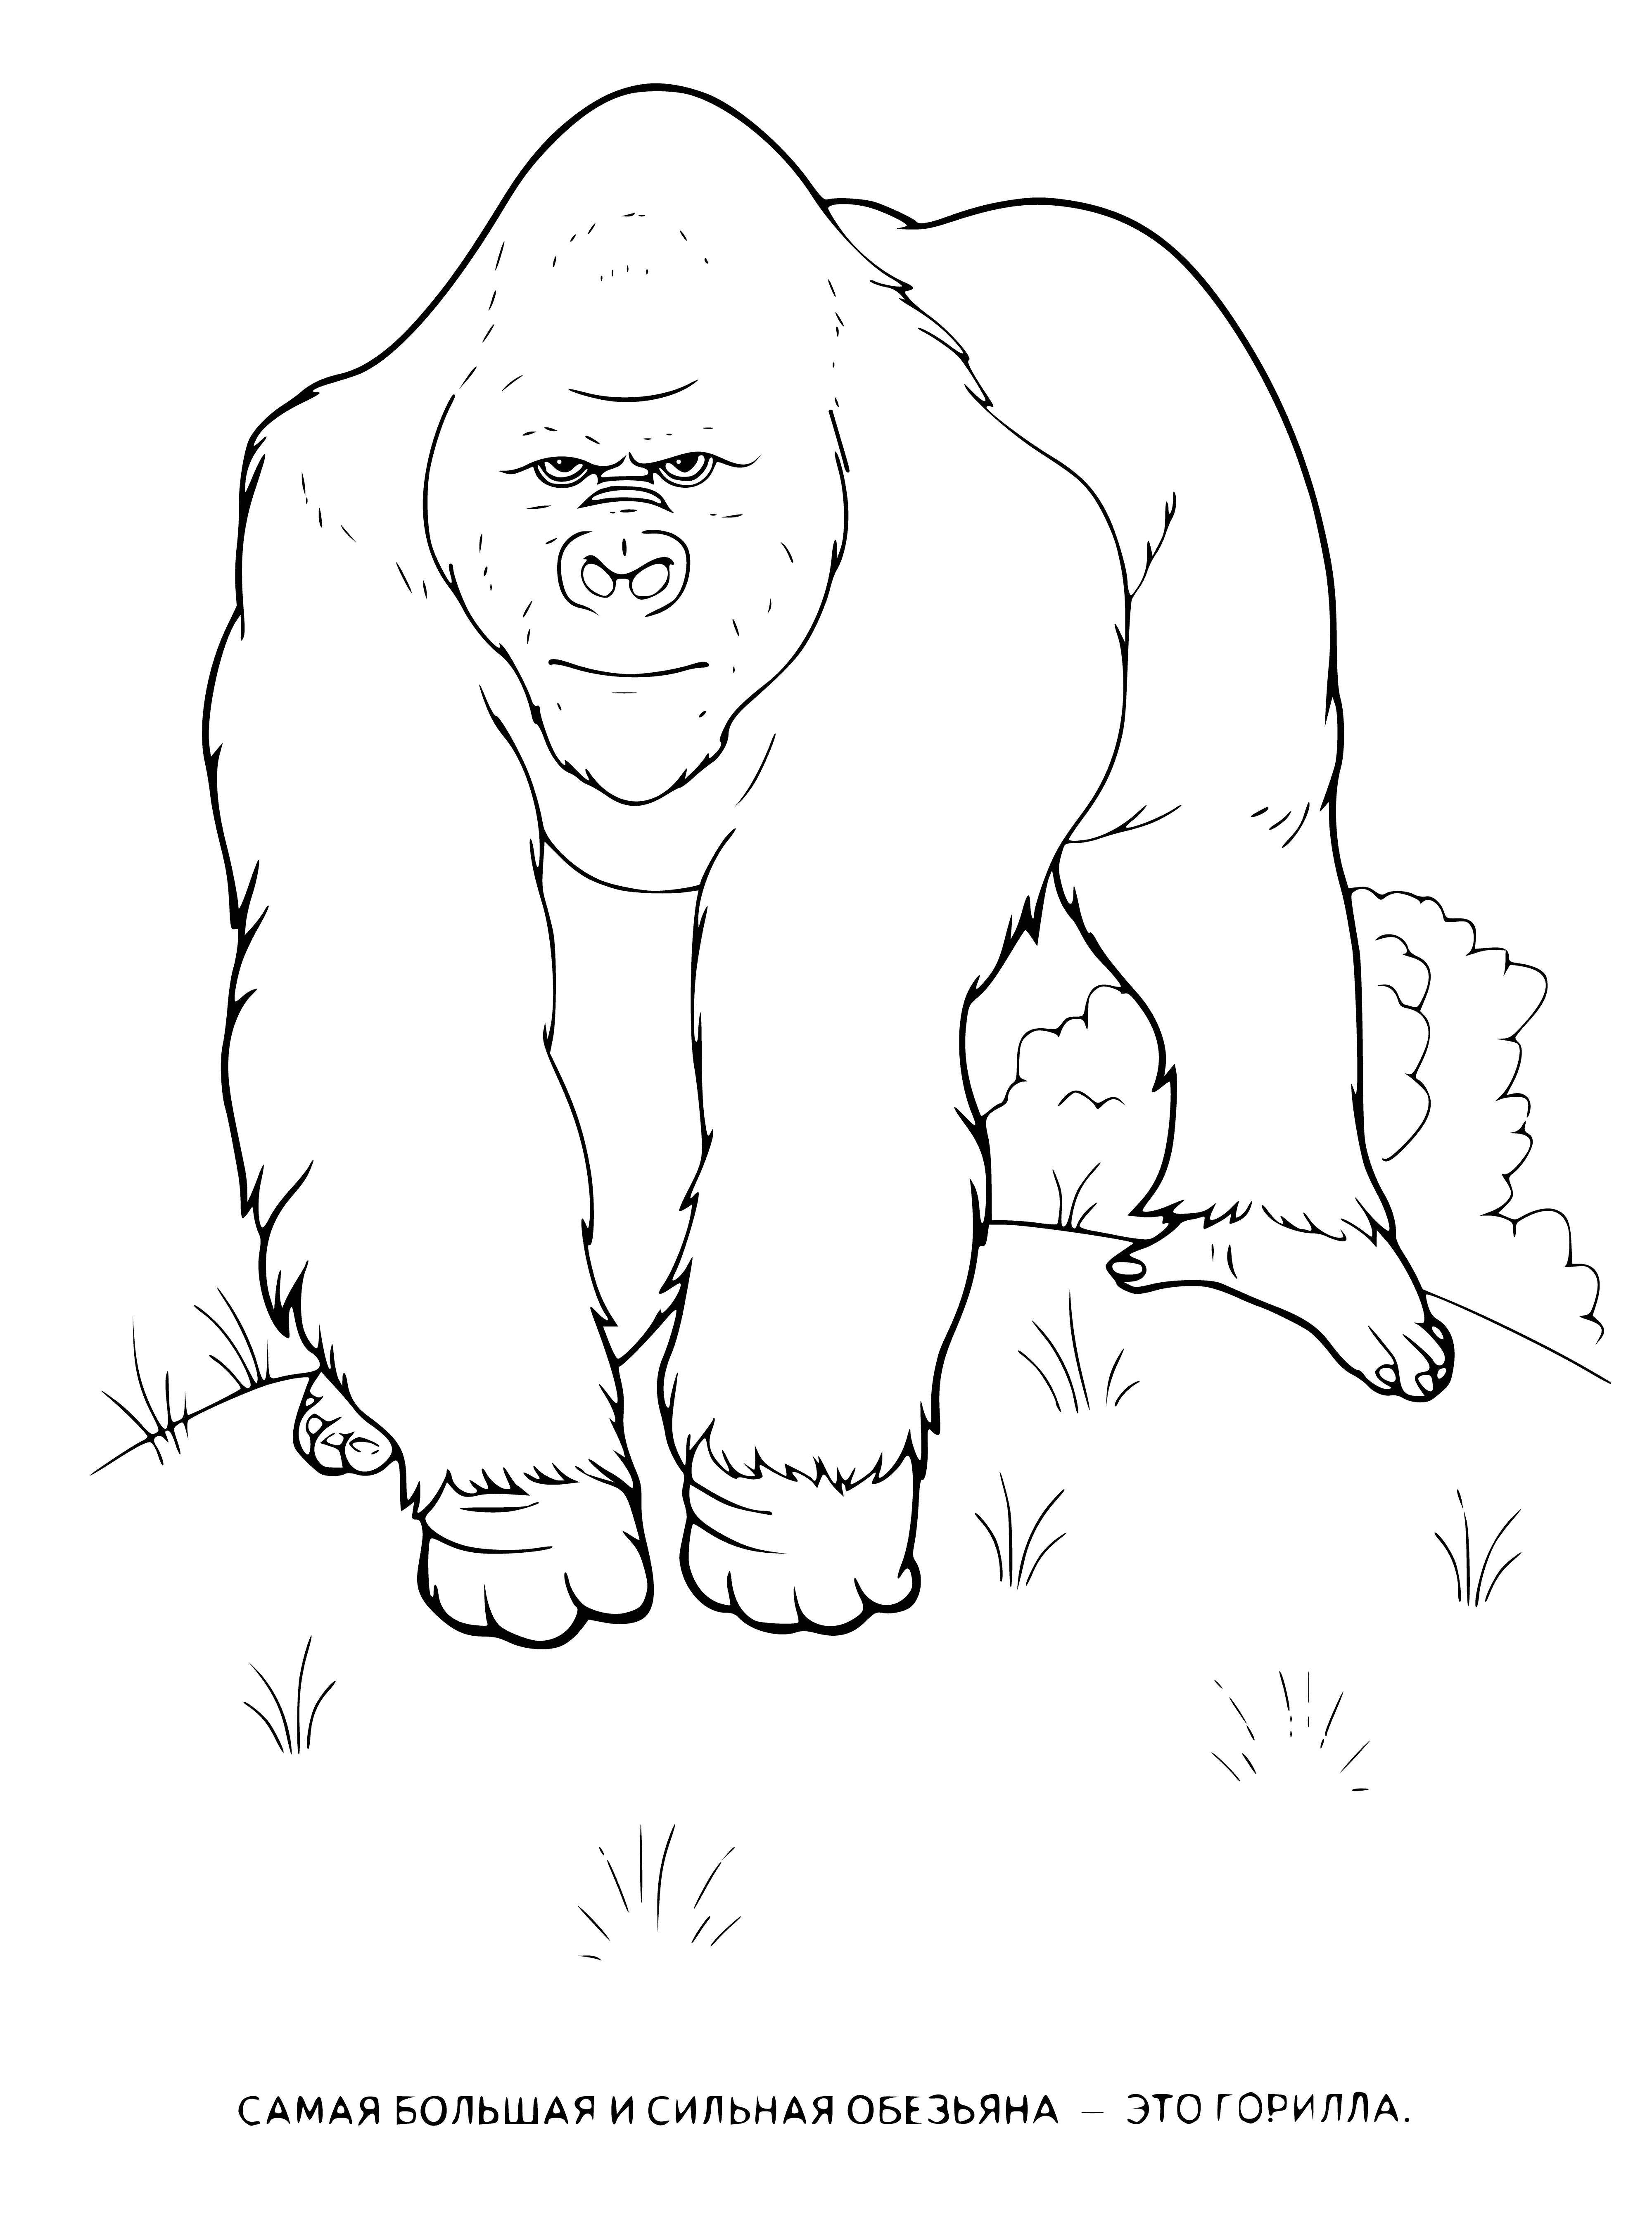 coloring page: The gorilla is the largest living primate, with dark hair, a short muzzle and long arms. It has small eyes and magenta hands & feet.